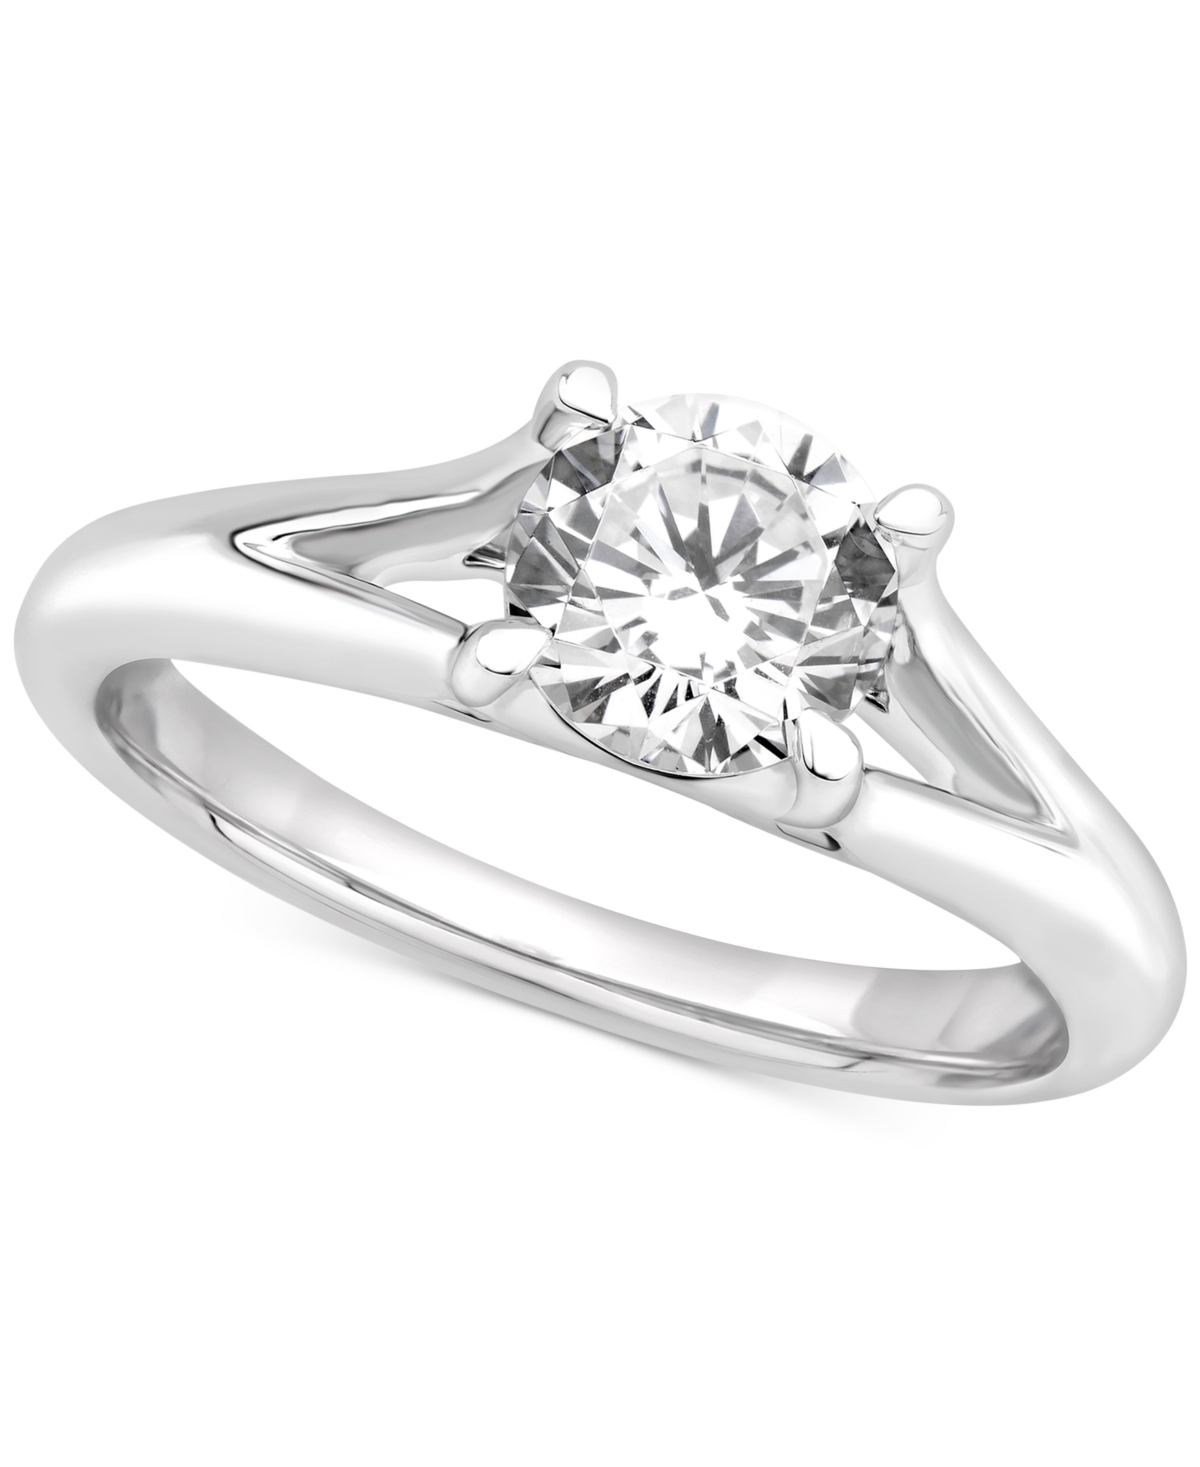 Gia Certified Diamond Solitaire Engagement Ring (1 ct. t.w.) in 14k White Gold - White Gold